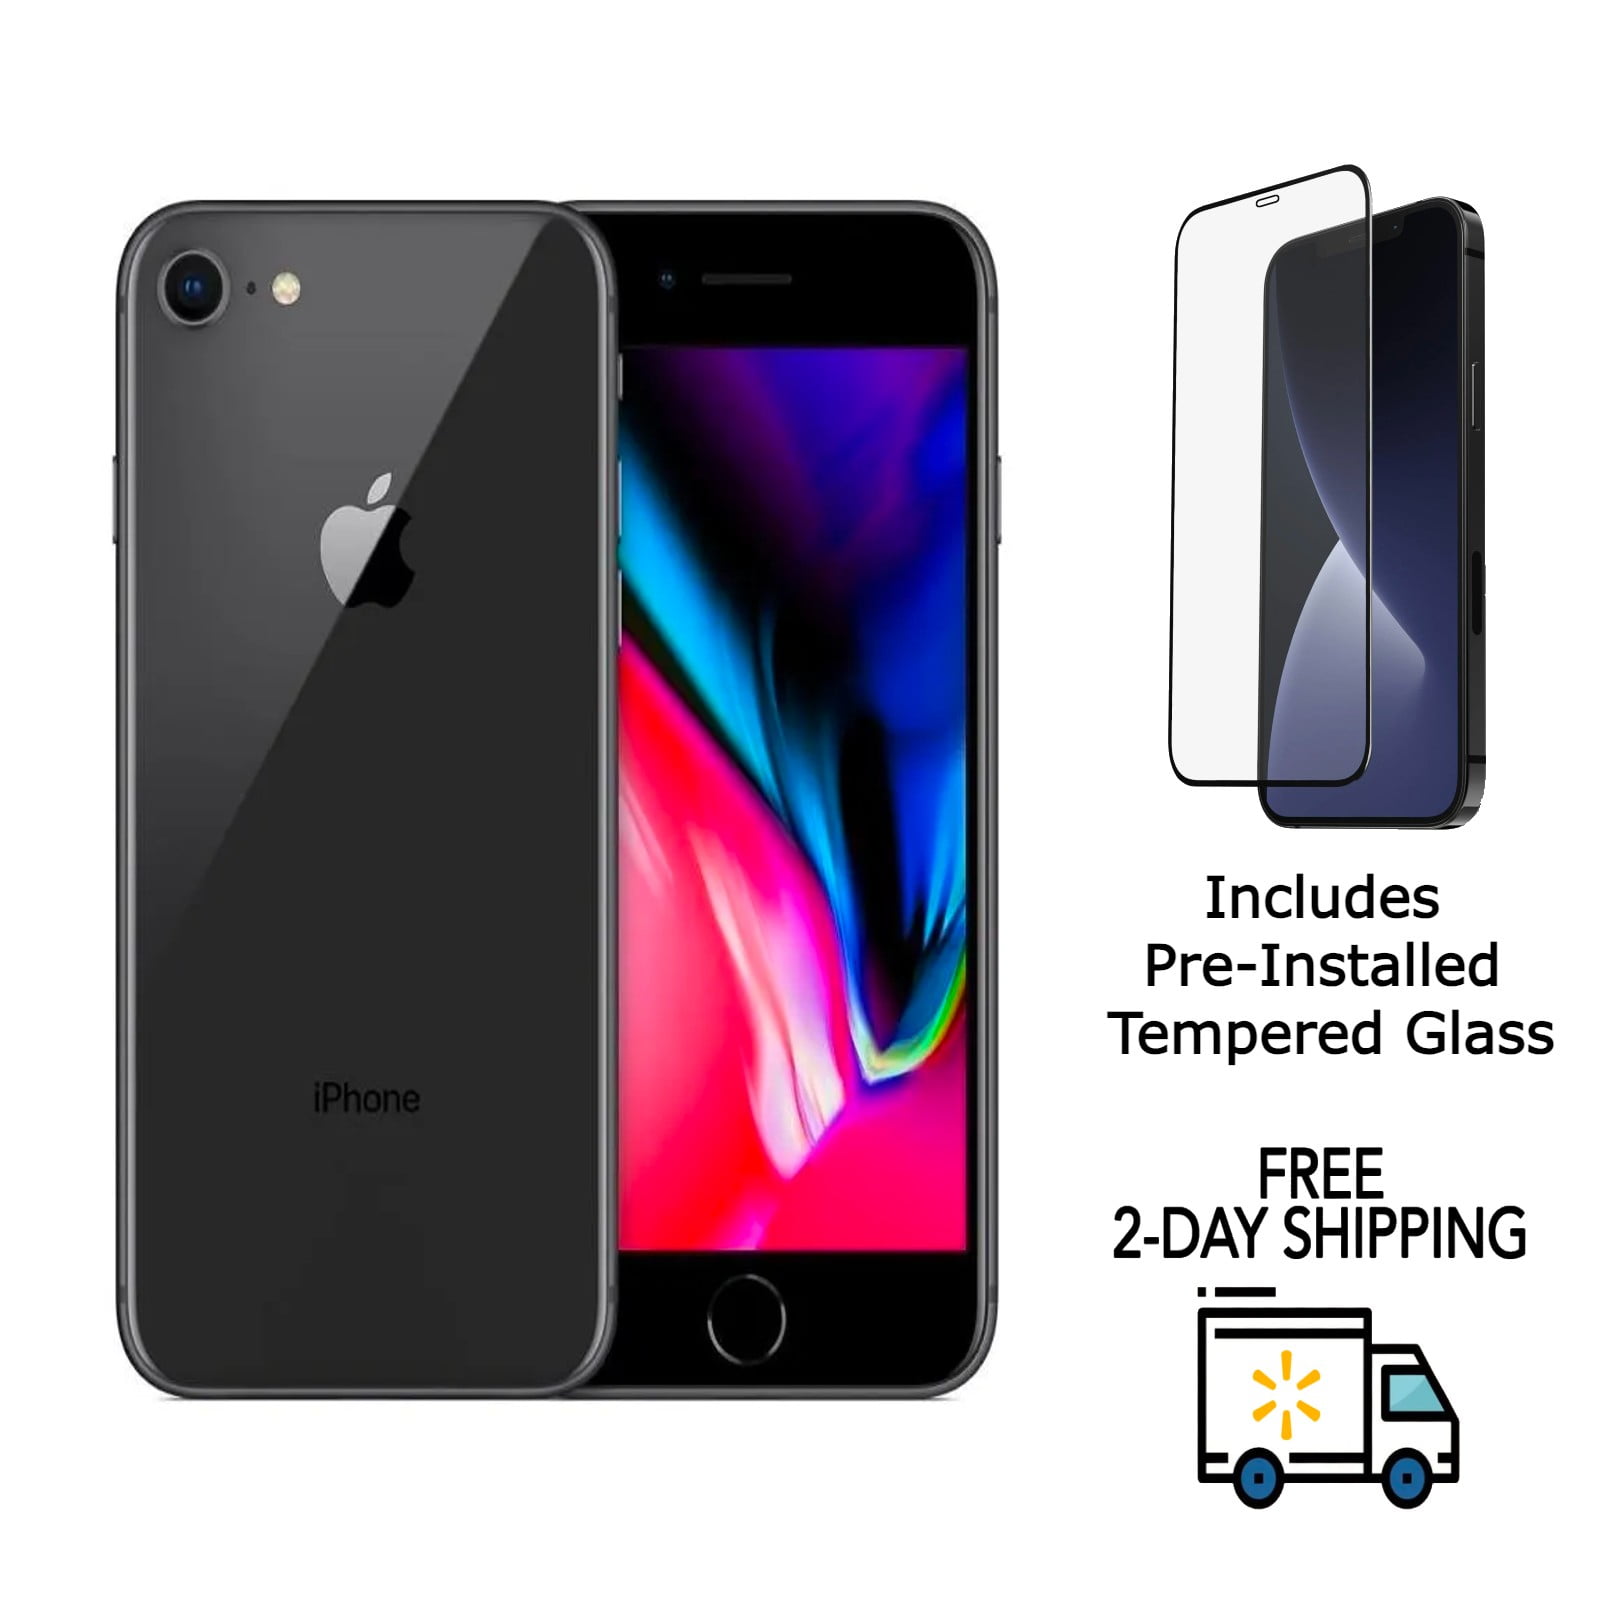 Pre-Owned Apple iPhone 8 64GB GSM Unlocked, Space Gray 